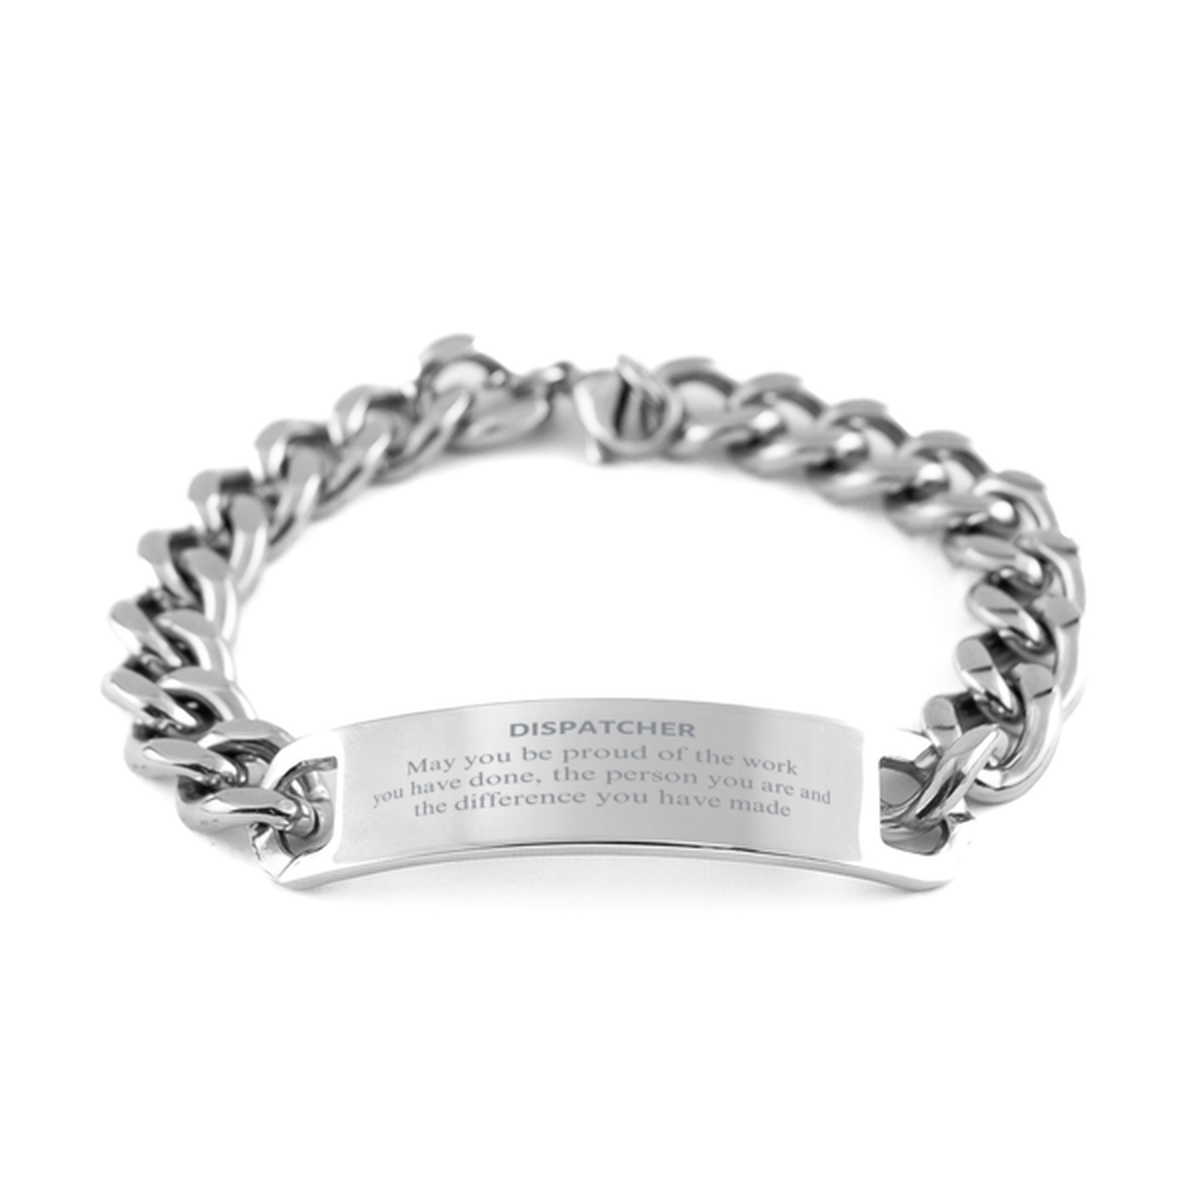 Dispatcher May you be proud of the work you have done, Retirement Dispatcher Cuban Chain Stainless Steel Bracelet for Colleague Appreciation Gifts Amazing for Dispatcher